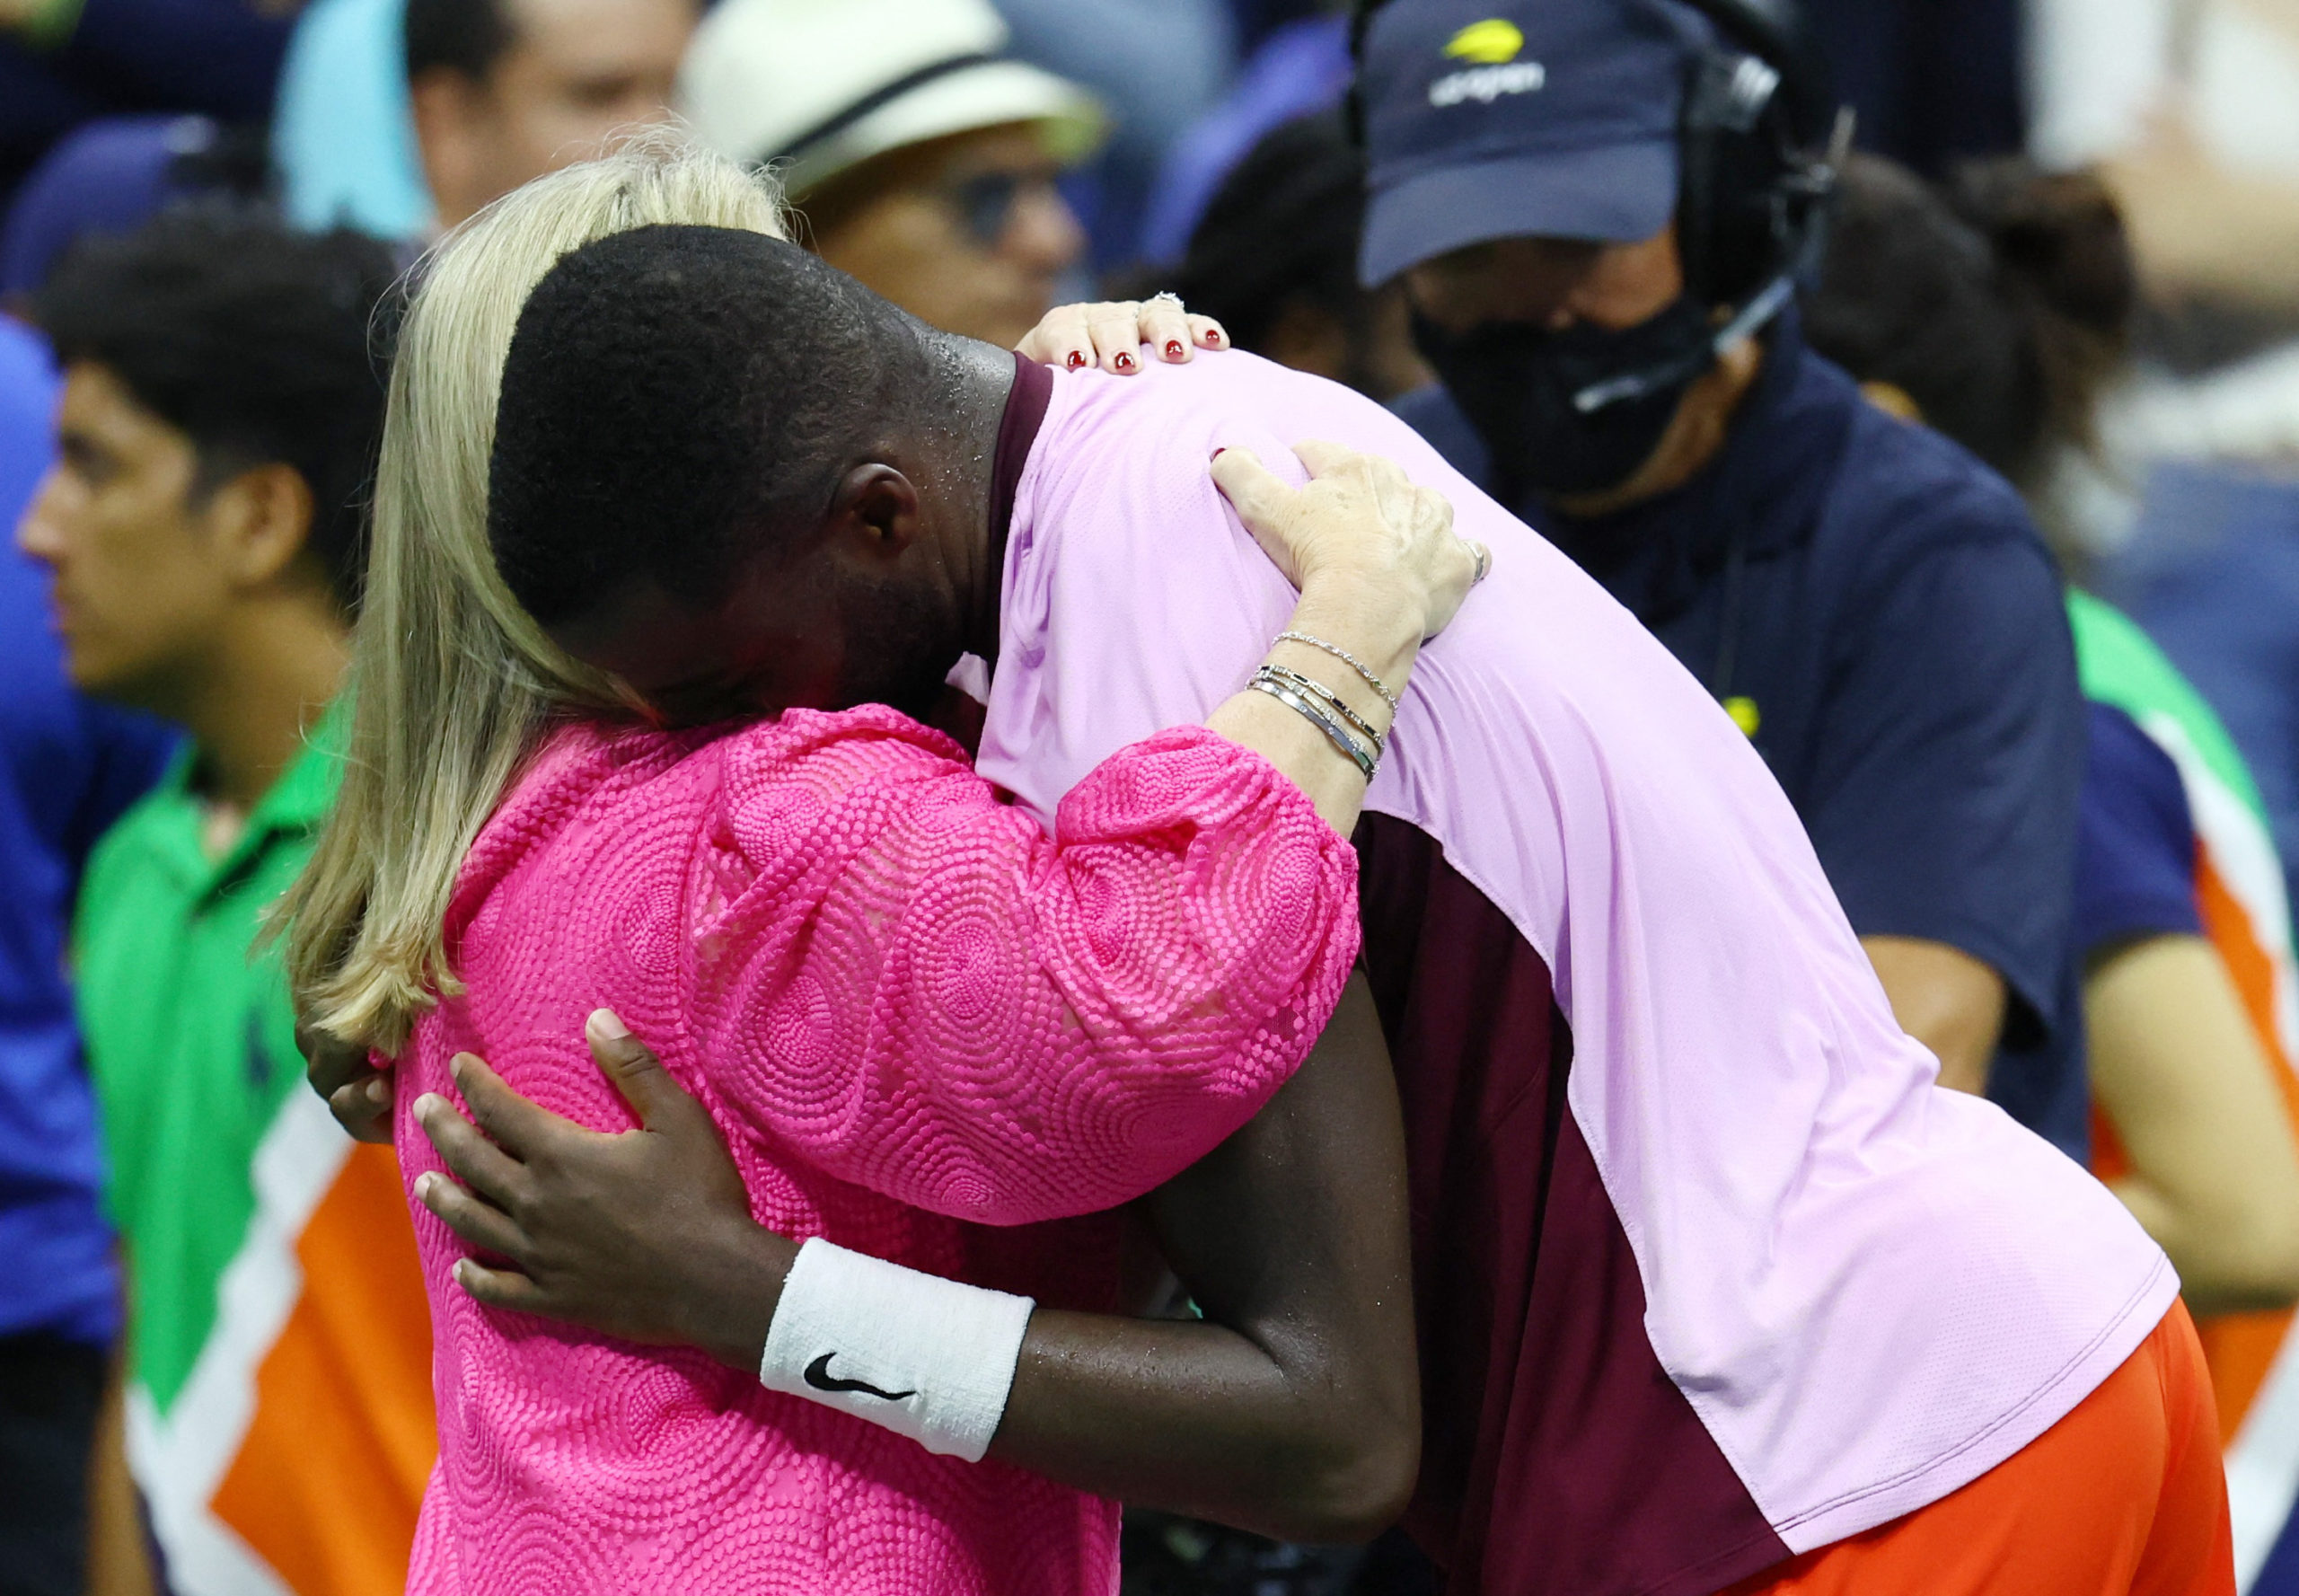 Tennis - U.S. Open - Flushing Meadows, New York, United States - September 9, 2022 Frances Tiafoe of the U.S. after losing his semi final match against Spain's Carlos Alcaraz 